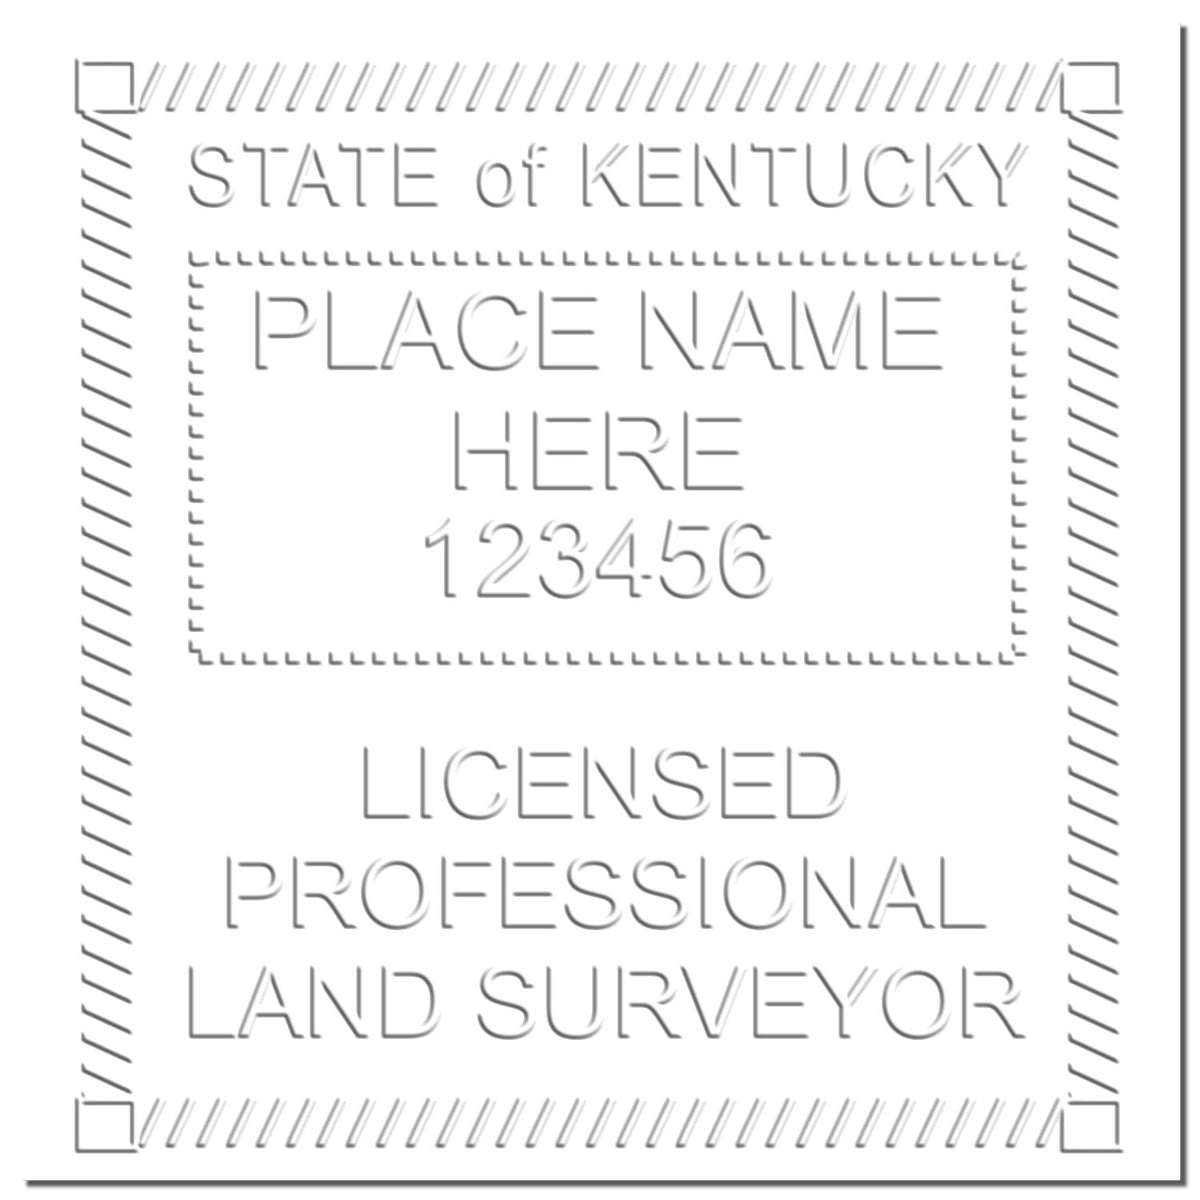 This paper is stamped with a sample imprint of the State of Kentucky Soft Land Surveyor Embossing Seal, signifying its quality and reliability.